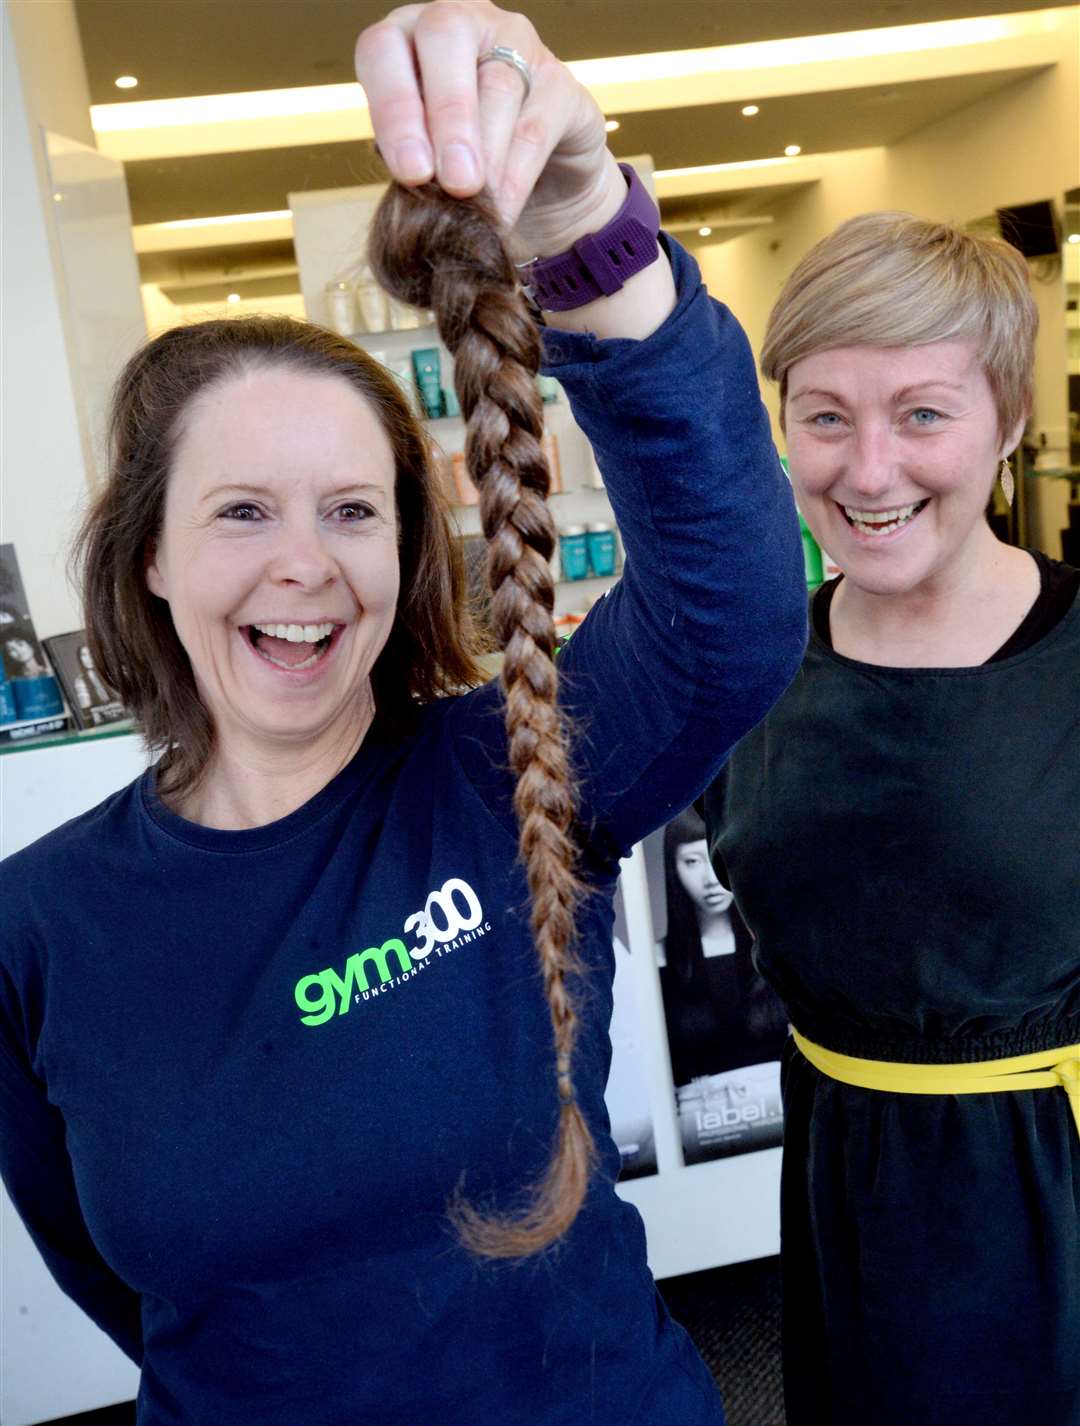 Nicola Ashmole (left) has her pony tail chopped off by Emma Martin at Toni & Guy in Inverness. Picture: Gair Fraser. Image No. 043457..